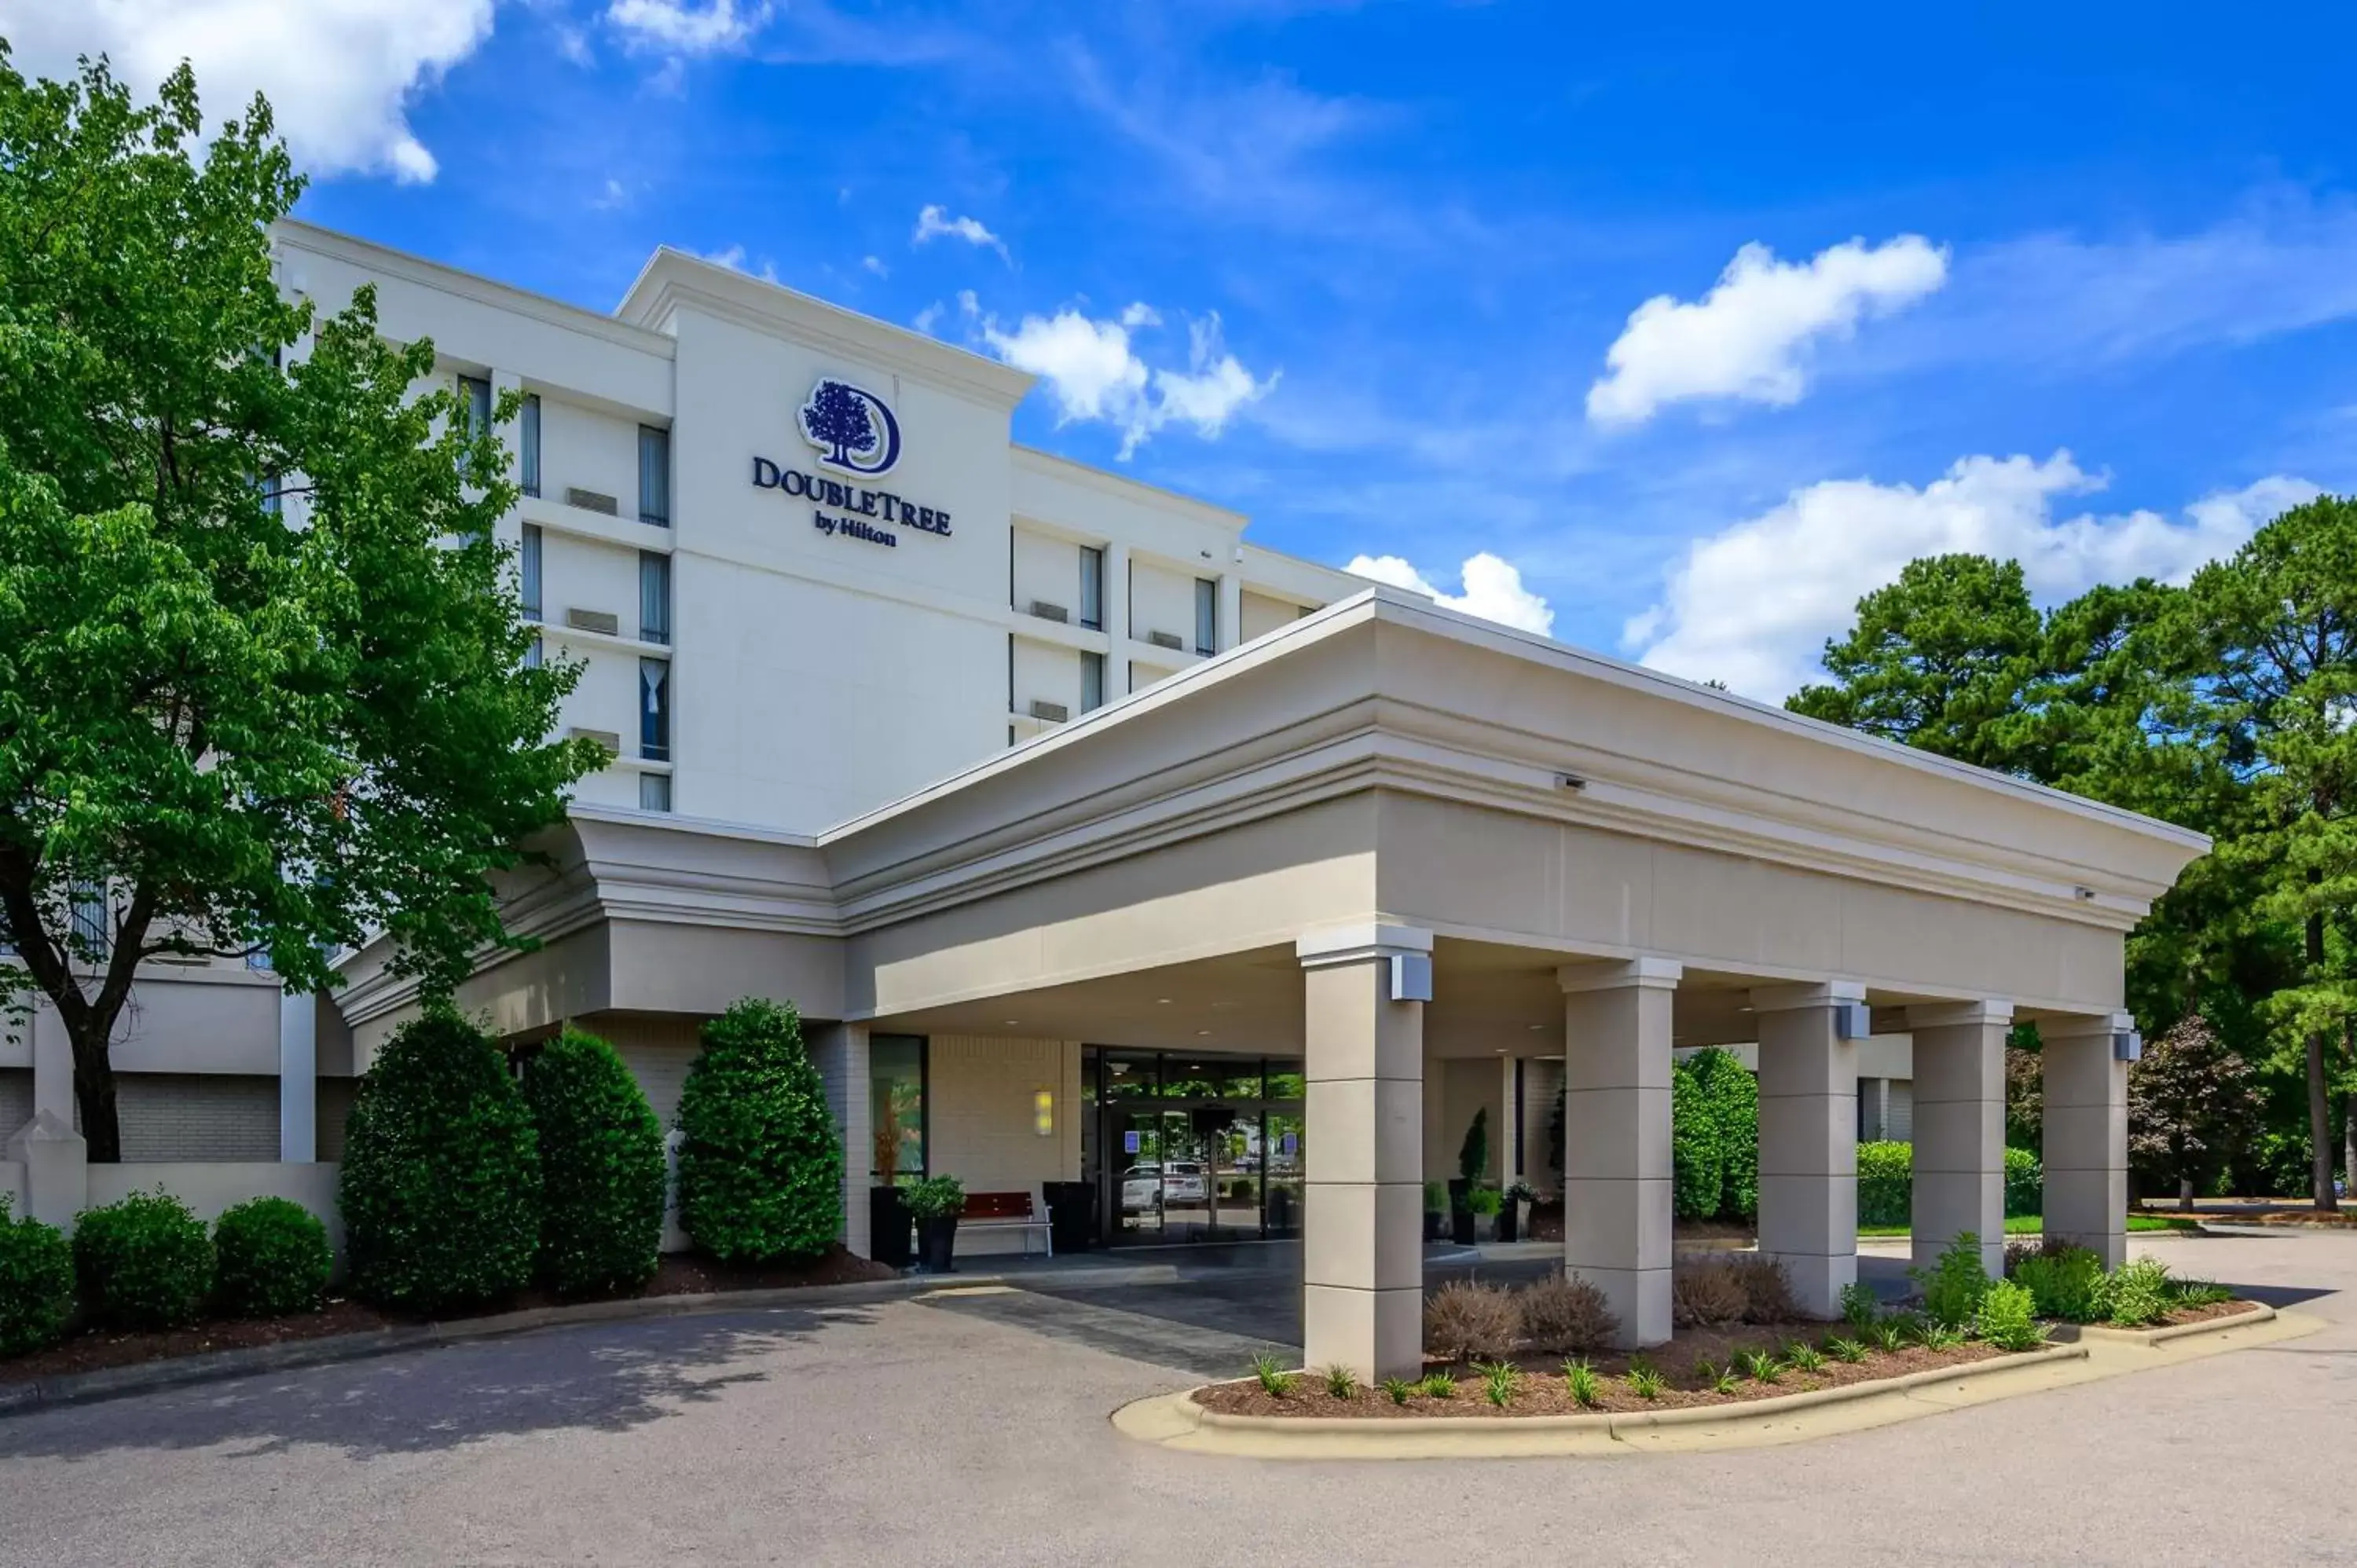 Property Building in DoubleTree by Hilton Raleigh Midtown, NC